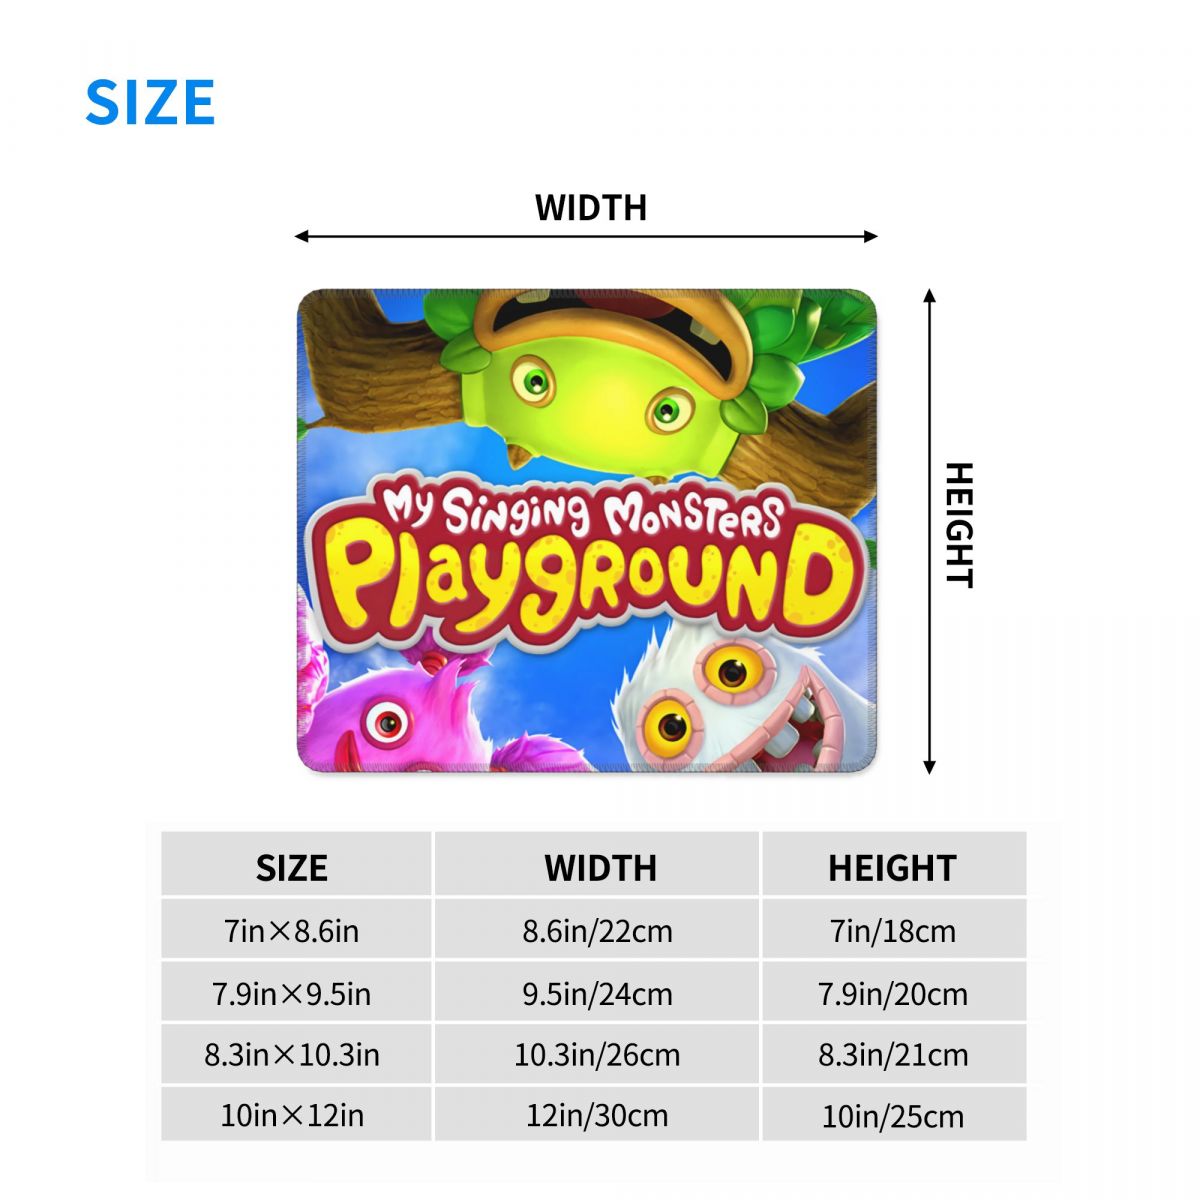 Customized Gaming Mouse Pad Non Slip Rubber Base My Singing Monsters Playground Mousepad Office Desk Video 5 - My Singing Monsters Plush